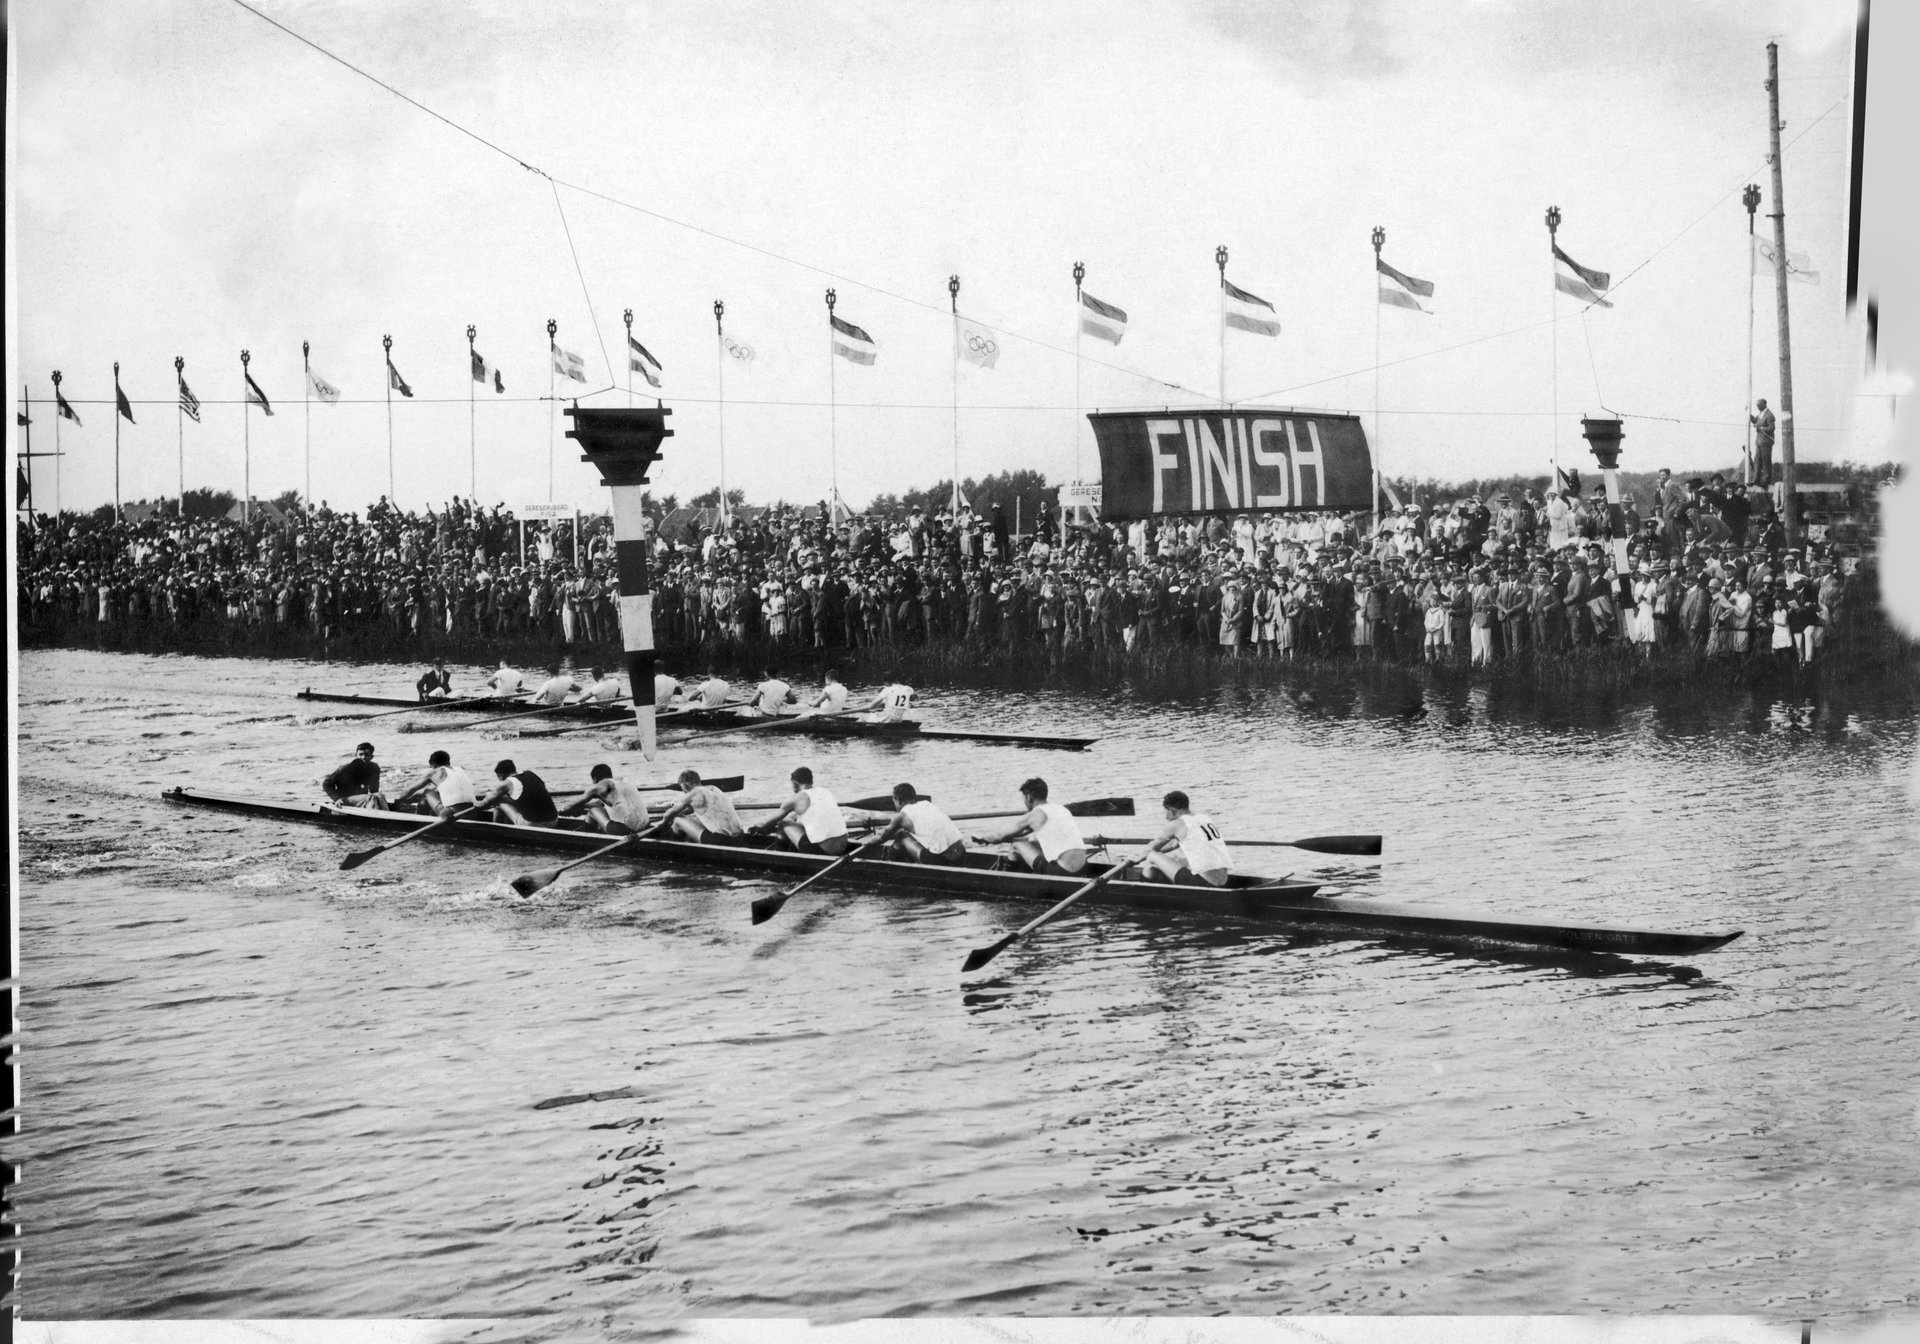 A black and white image of boats being rowed in a race as they cross under a sign that says finish